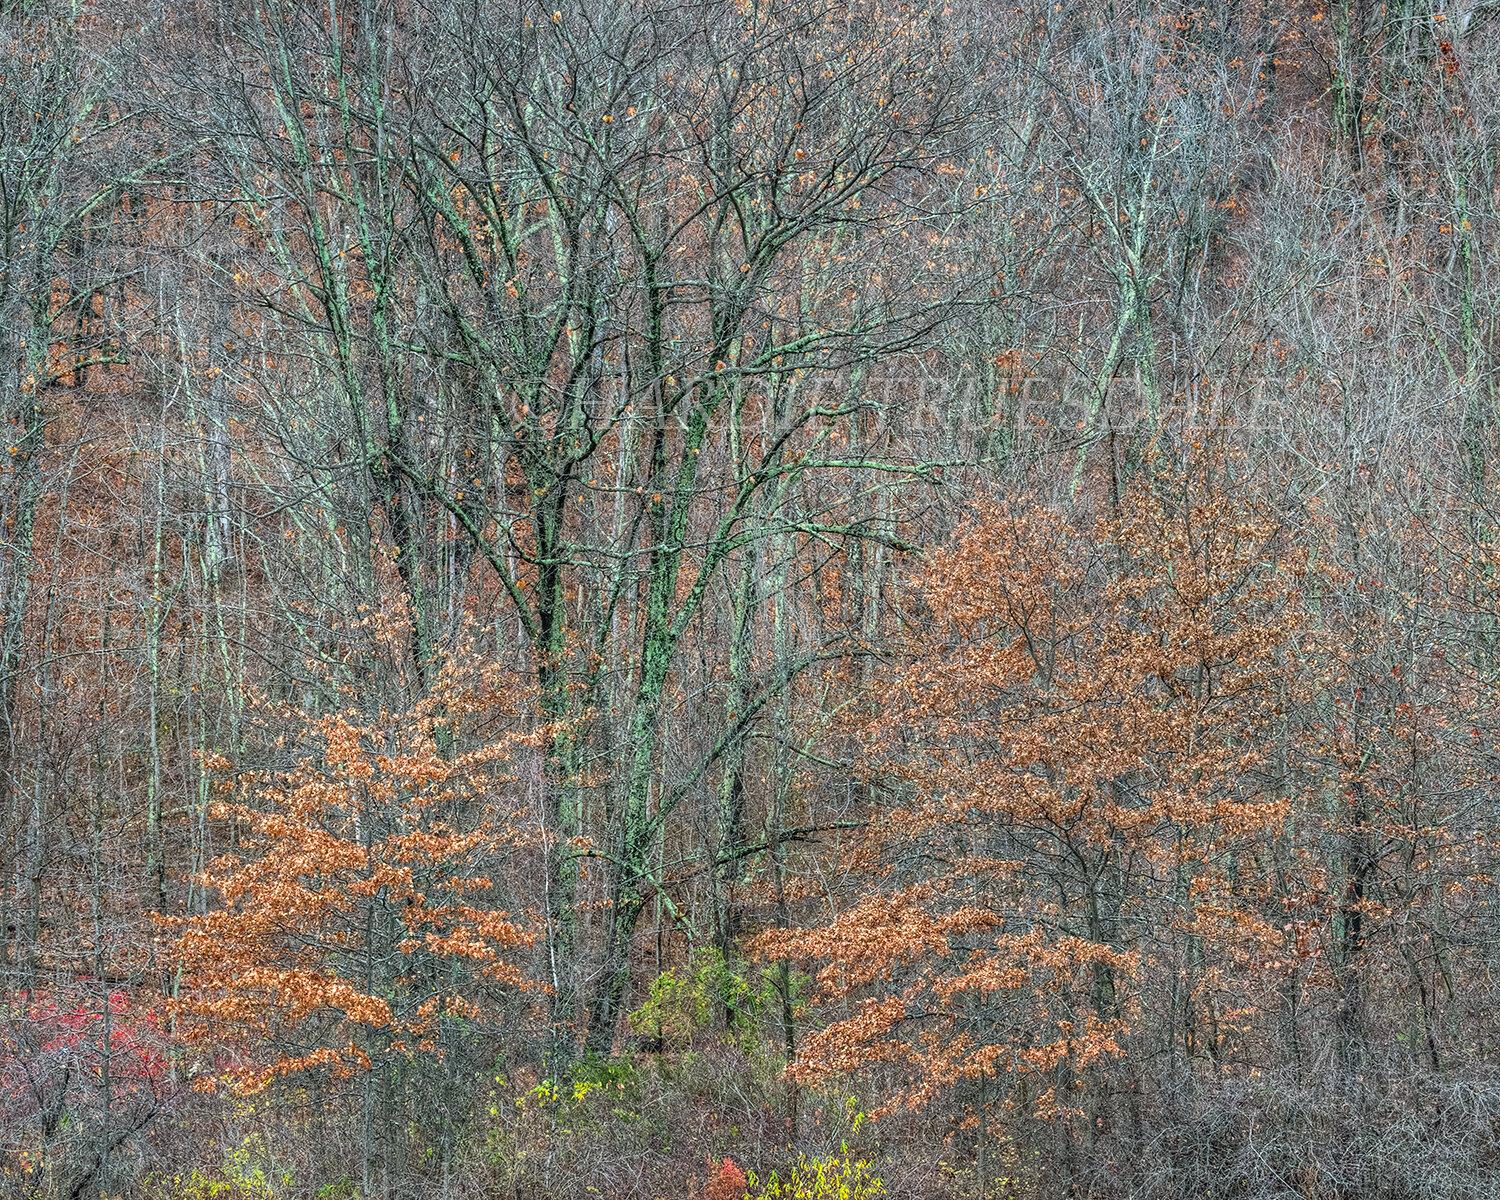 Gks#891 "Late Autumn, Mohonk Preserve"